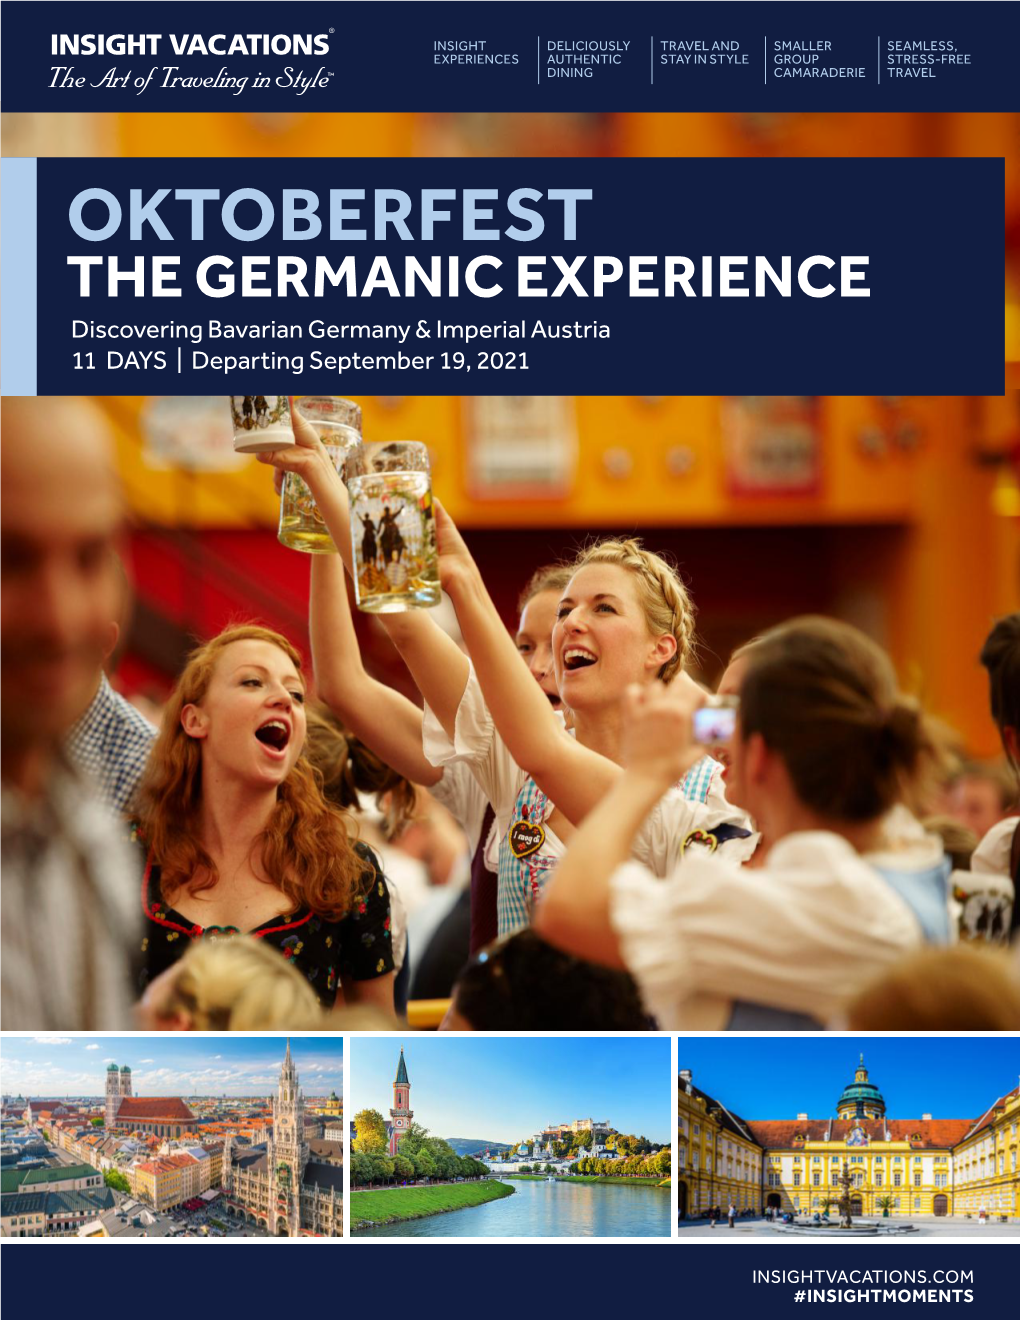 OKTOBERFEST the GERMANIC EXPERIENCE Discovering Bavarian Germany & Imperial Austria 11 DAYS | Departing September 19, 2021